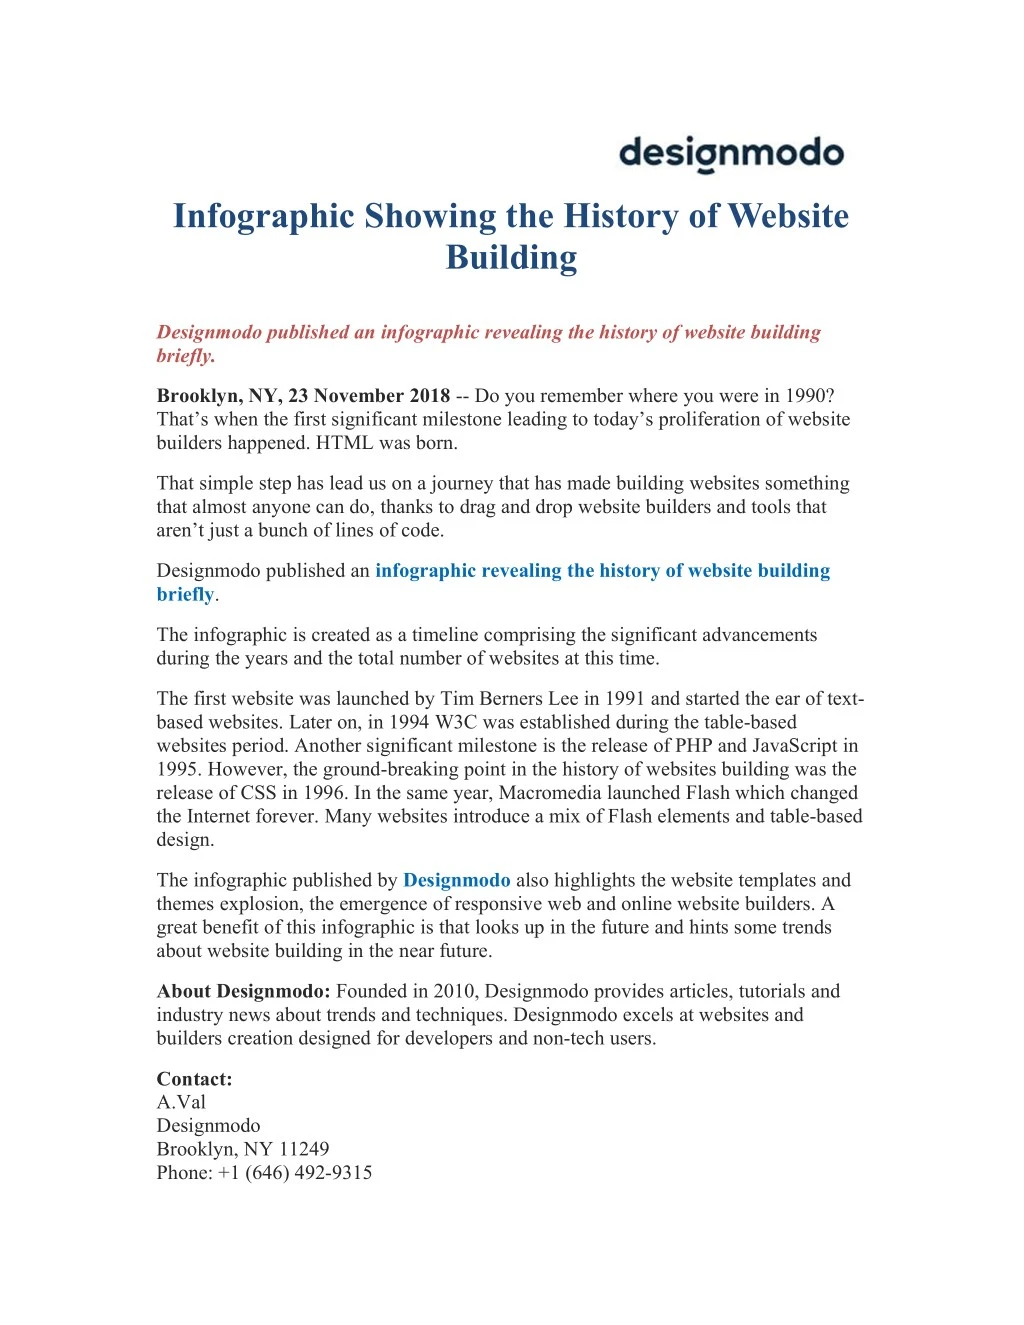 infographic showing the history of website